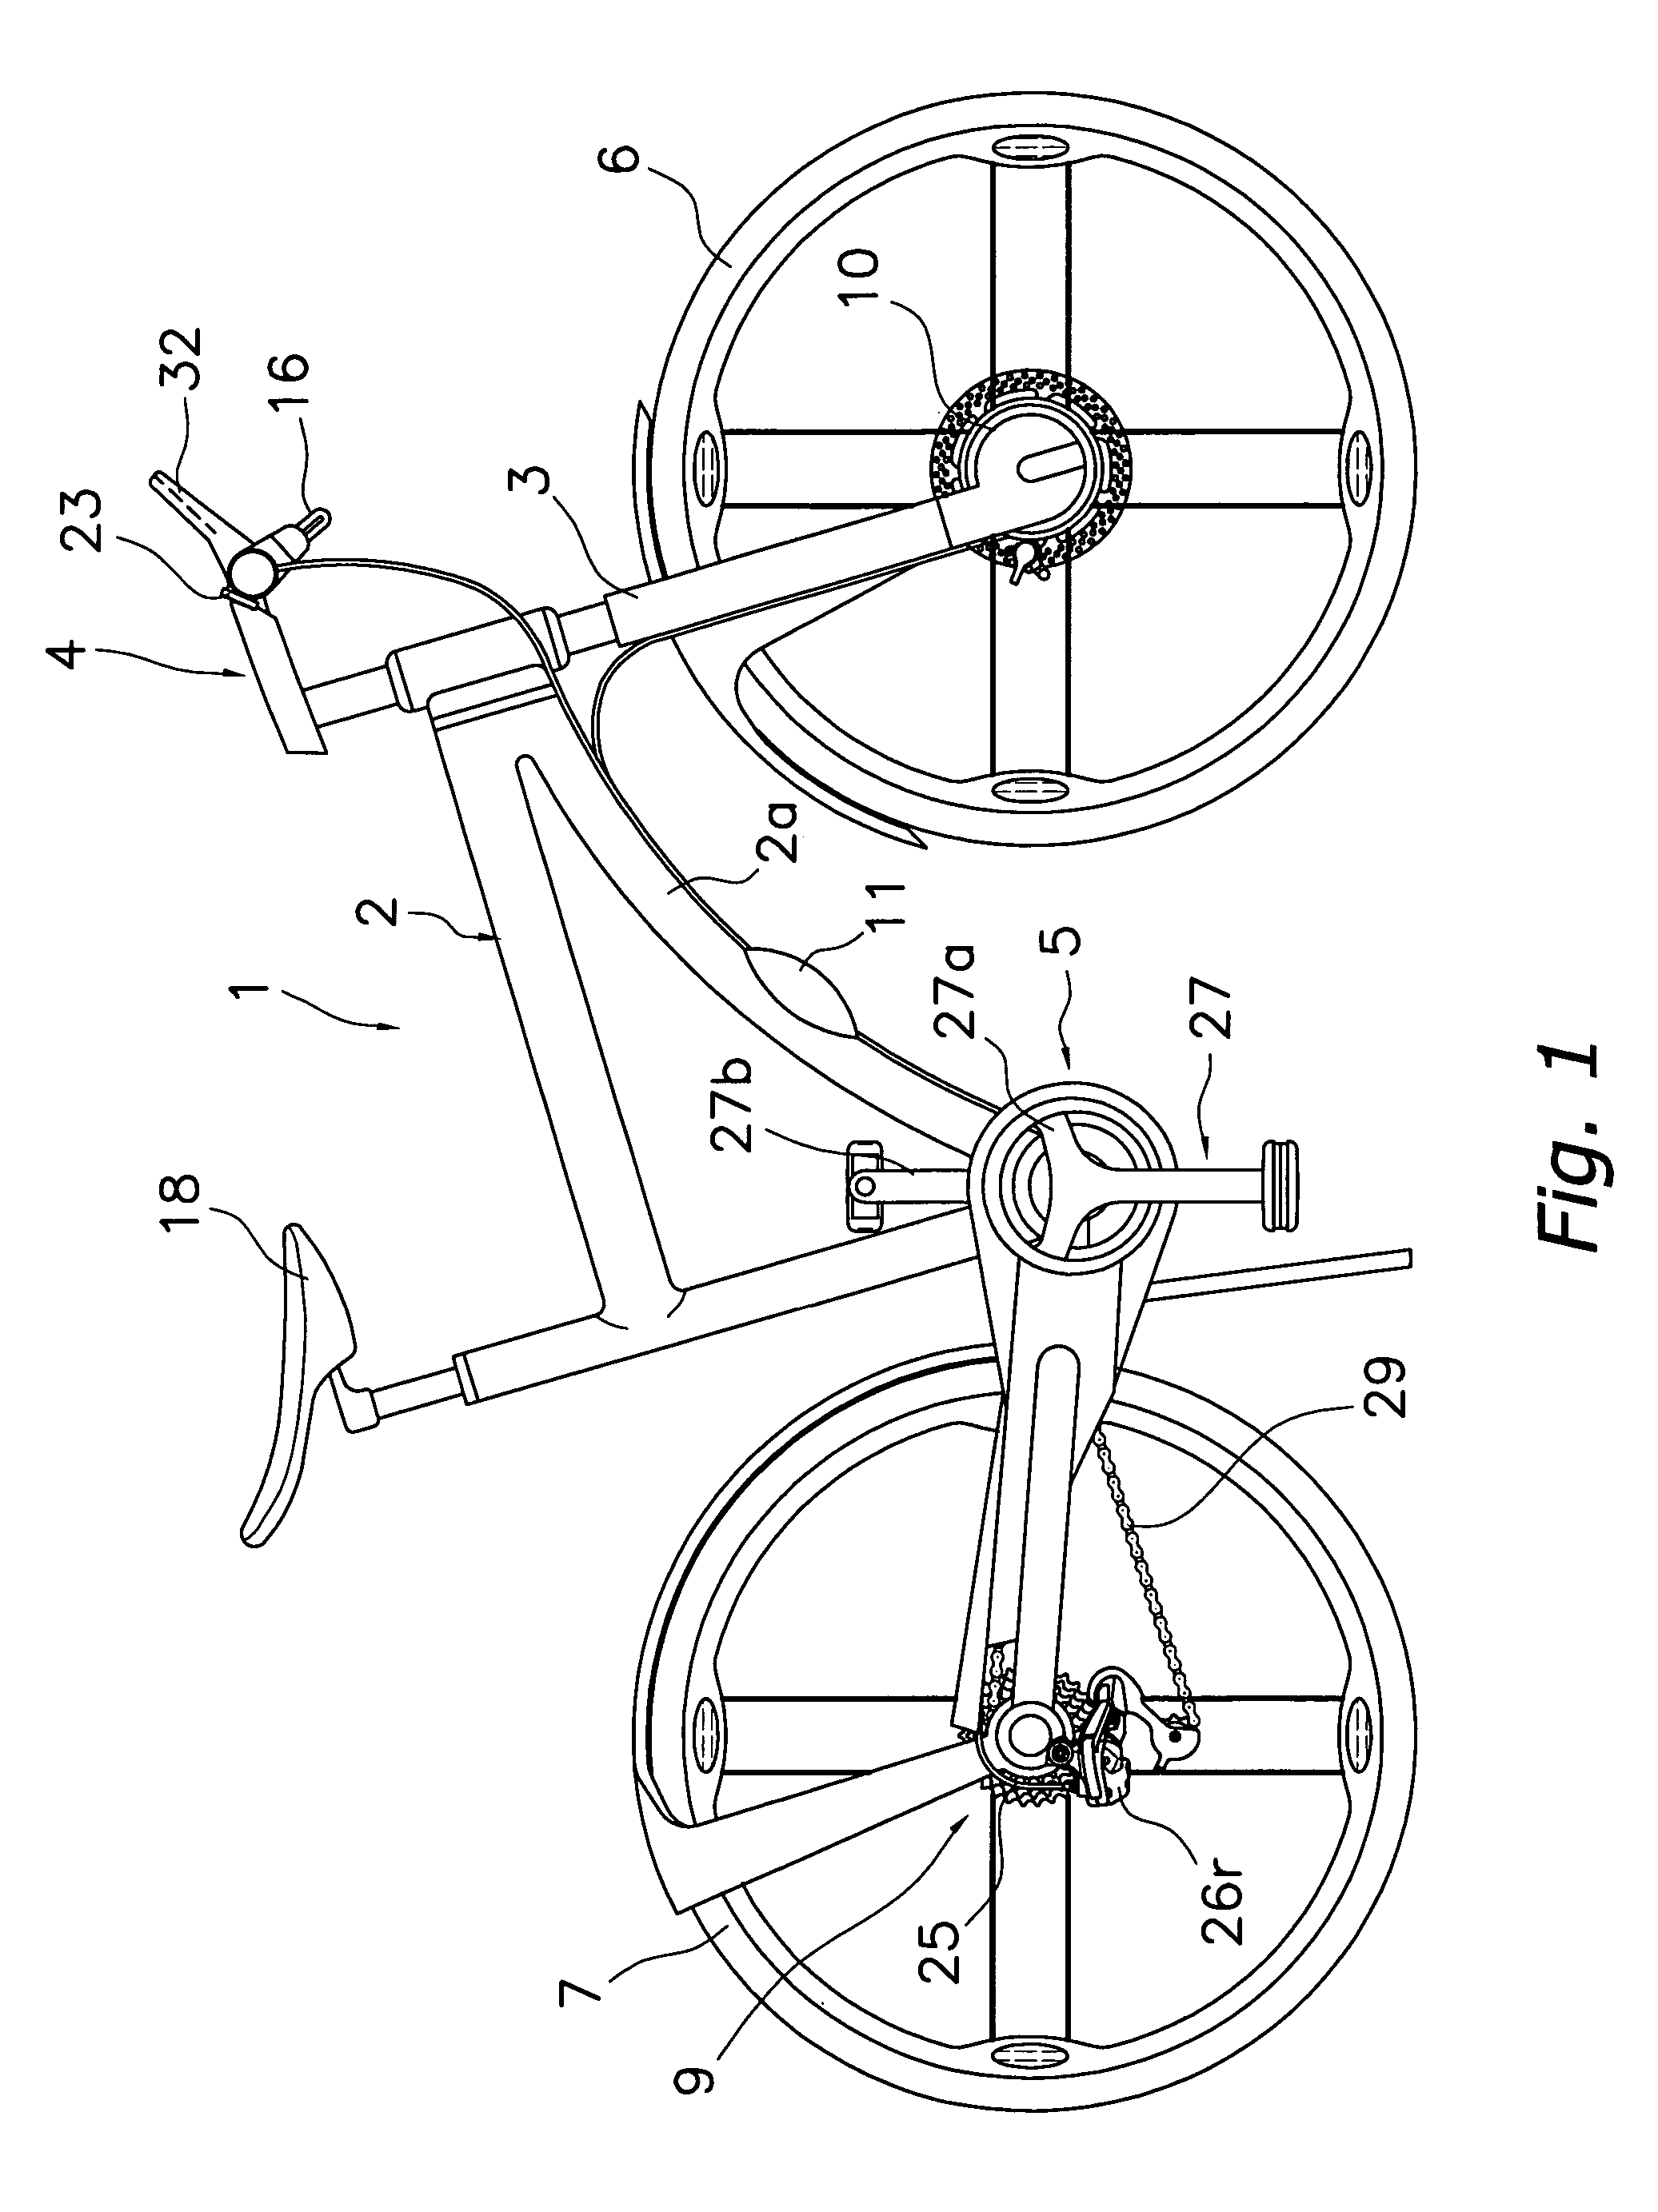 Bicycle electric power unit